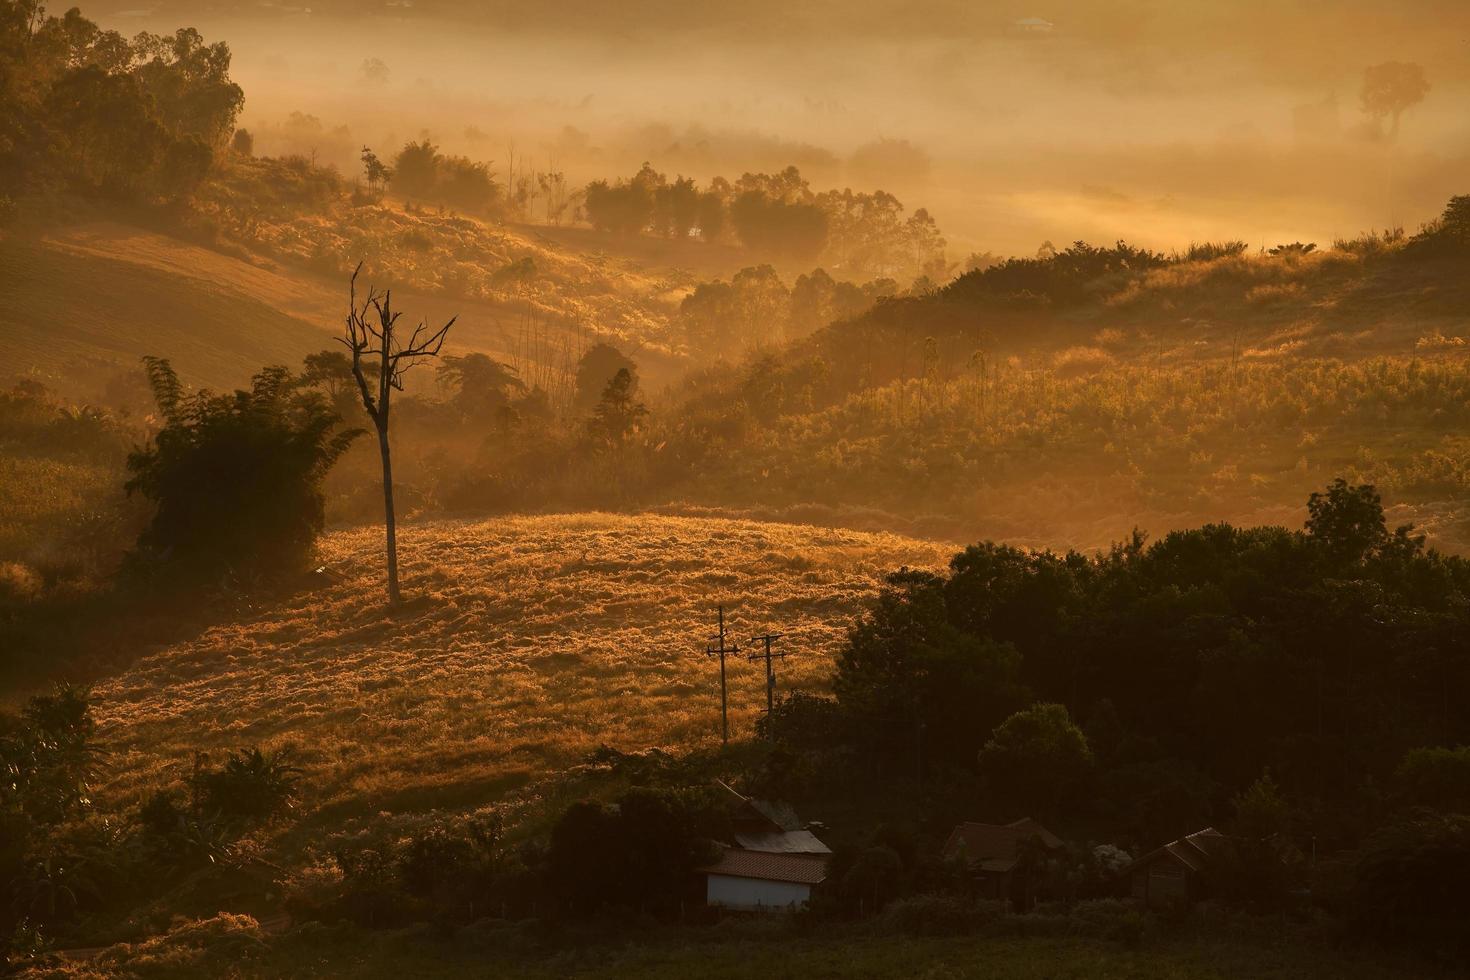 House in the country with fog in morning sunrise photo